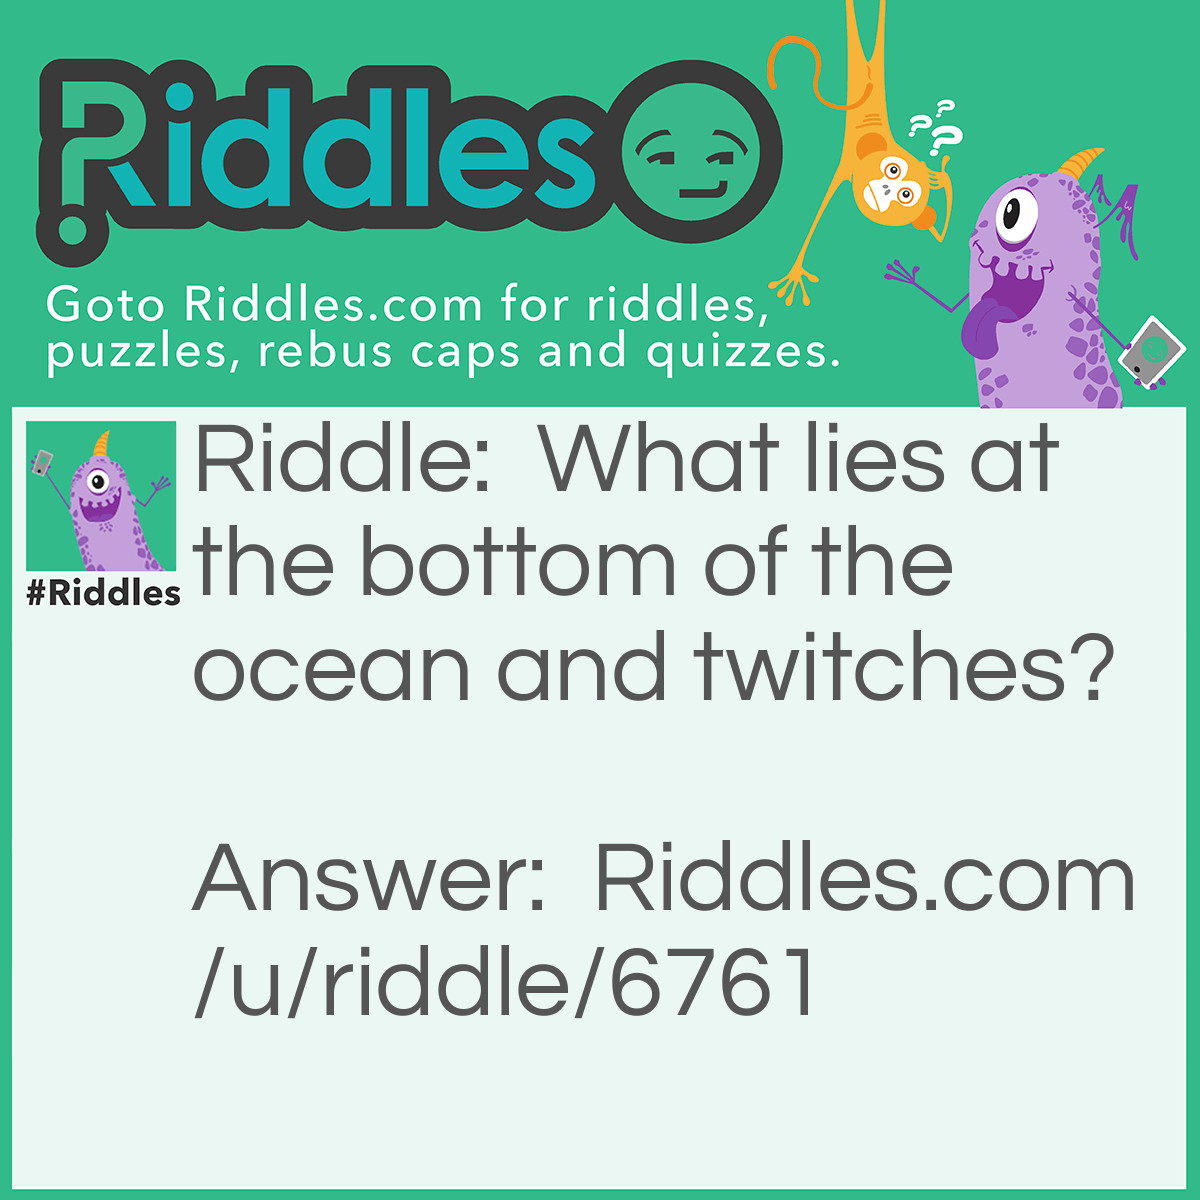 Riddle: What lies at the bottom of the ocean and twitches? Answer: A nervous wreck